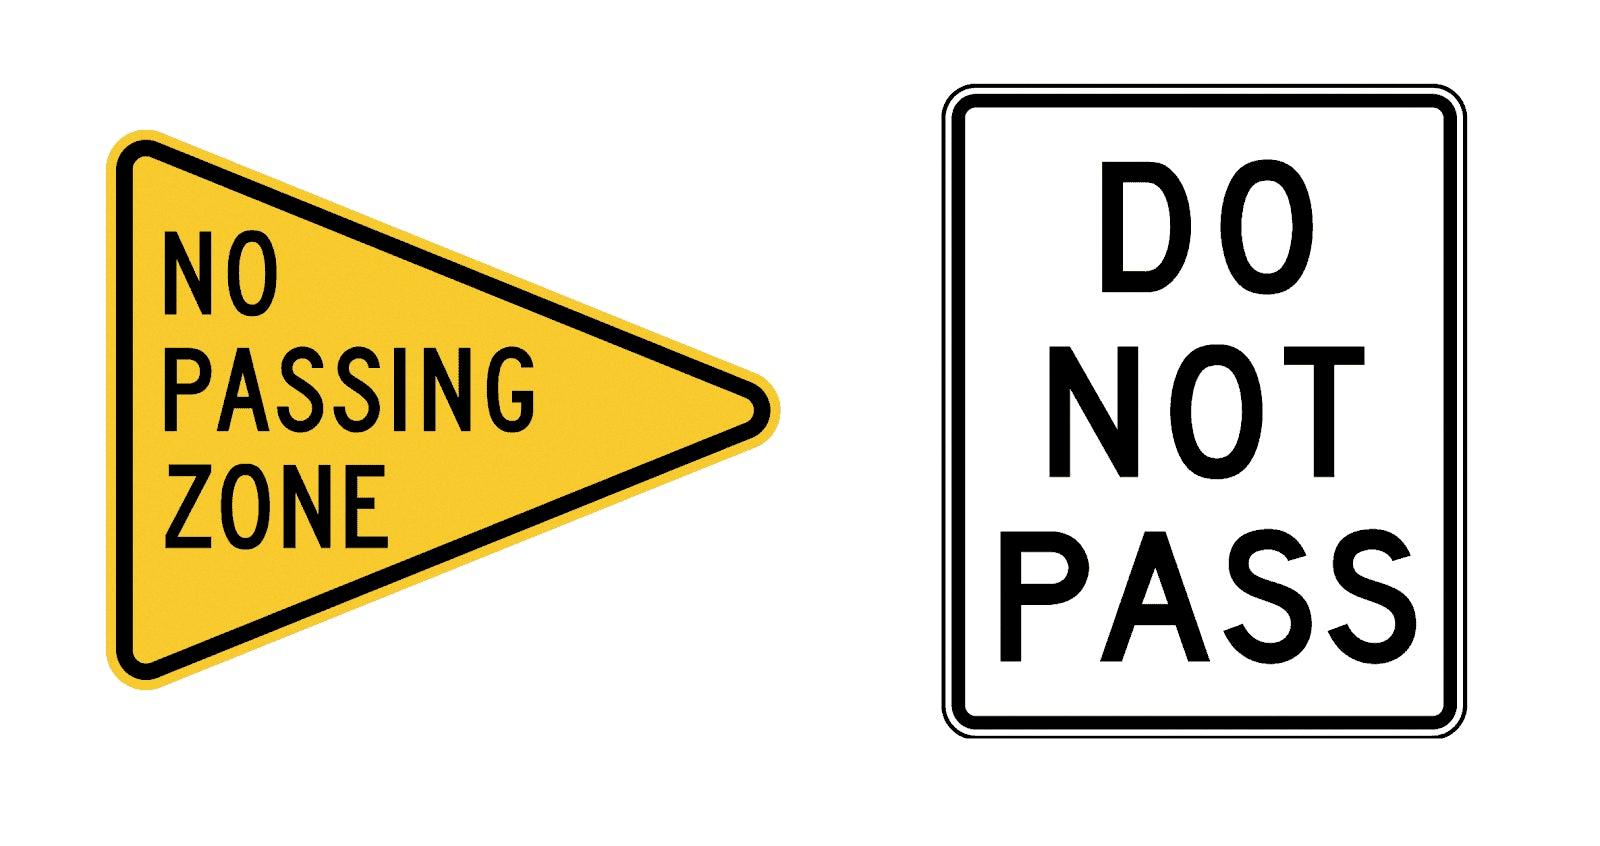 pennant shaped signs indicate